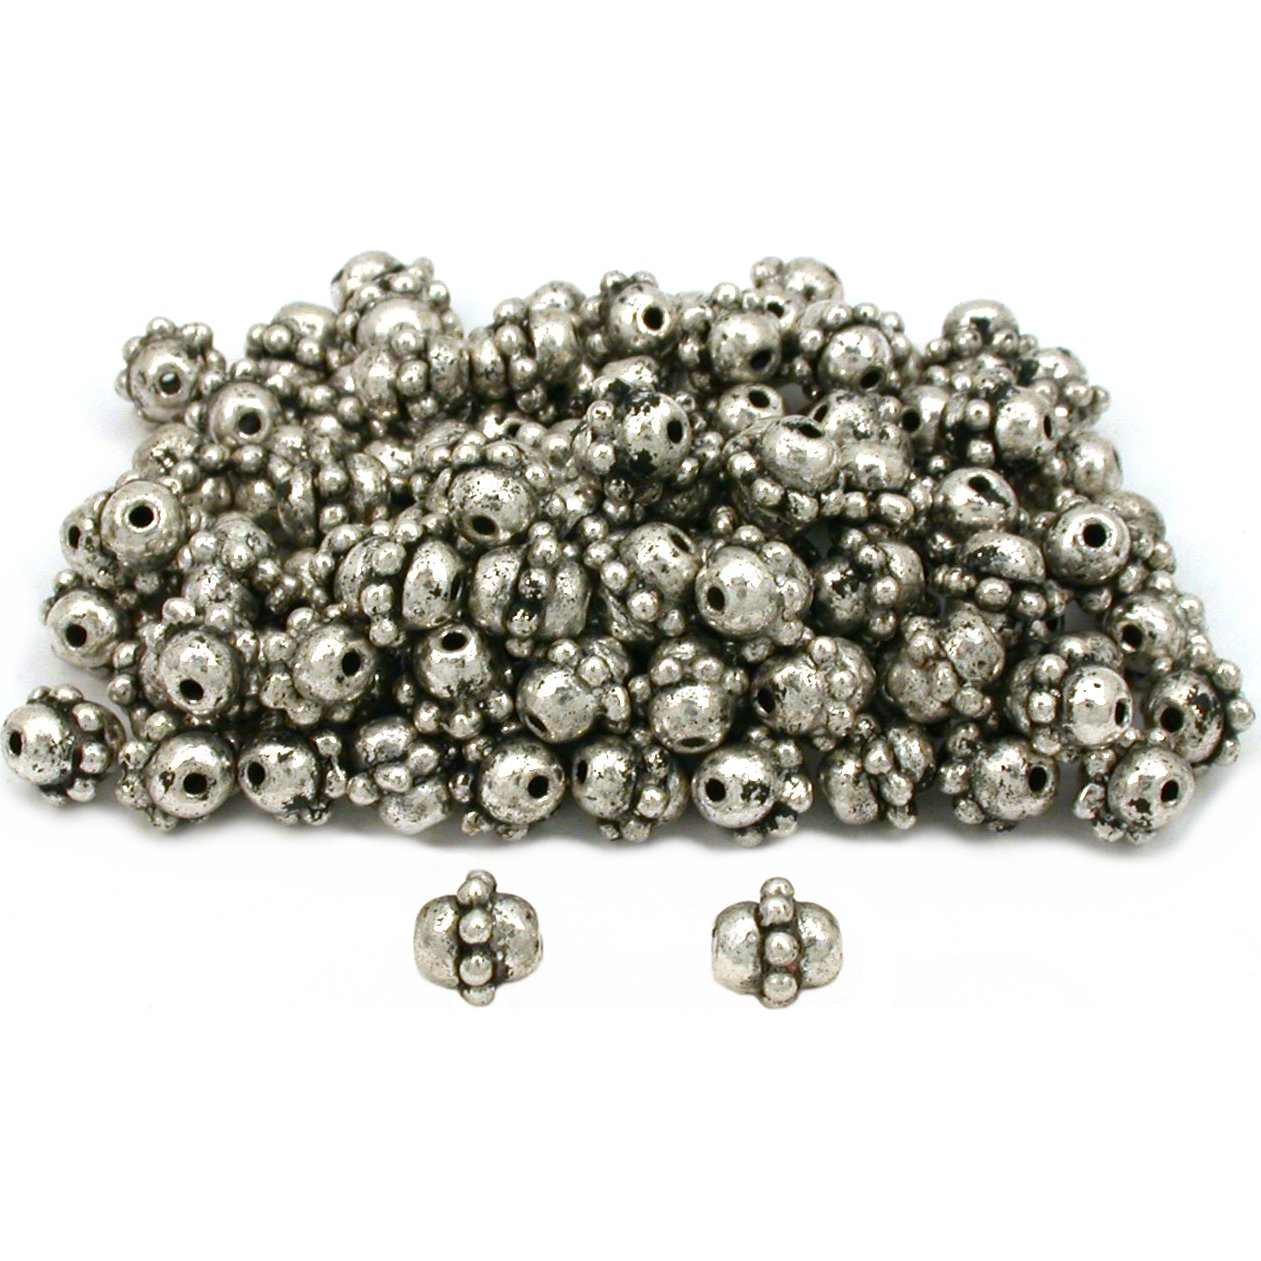 Findingking Barrel Bali Beads Antique Silver Plated 7mm Approx 100